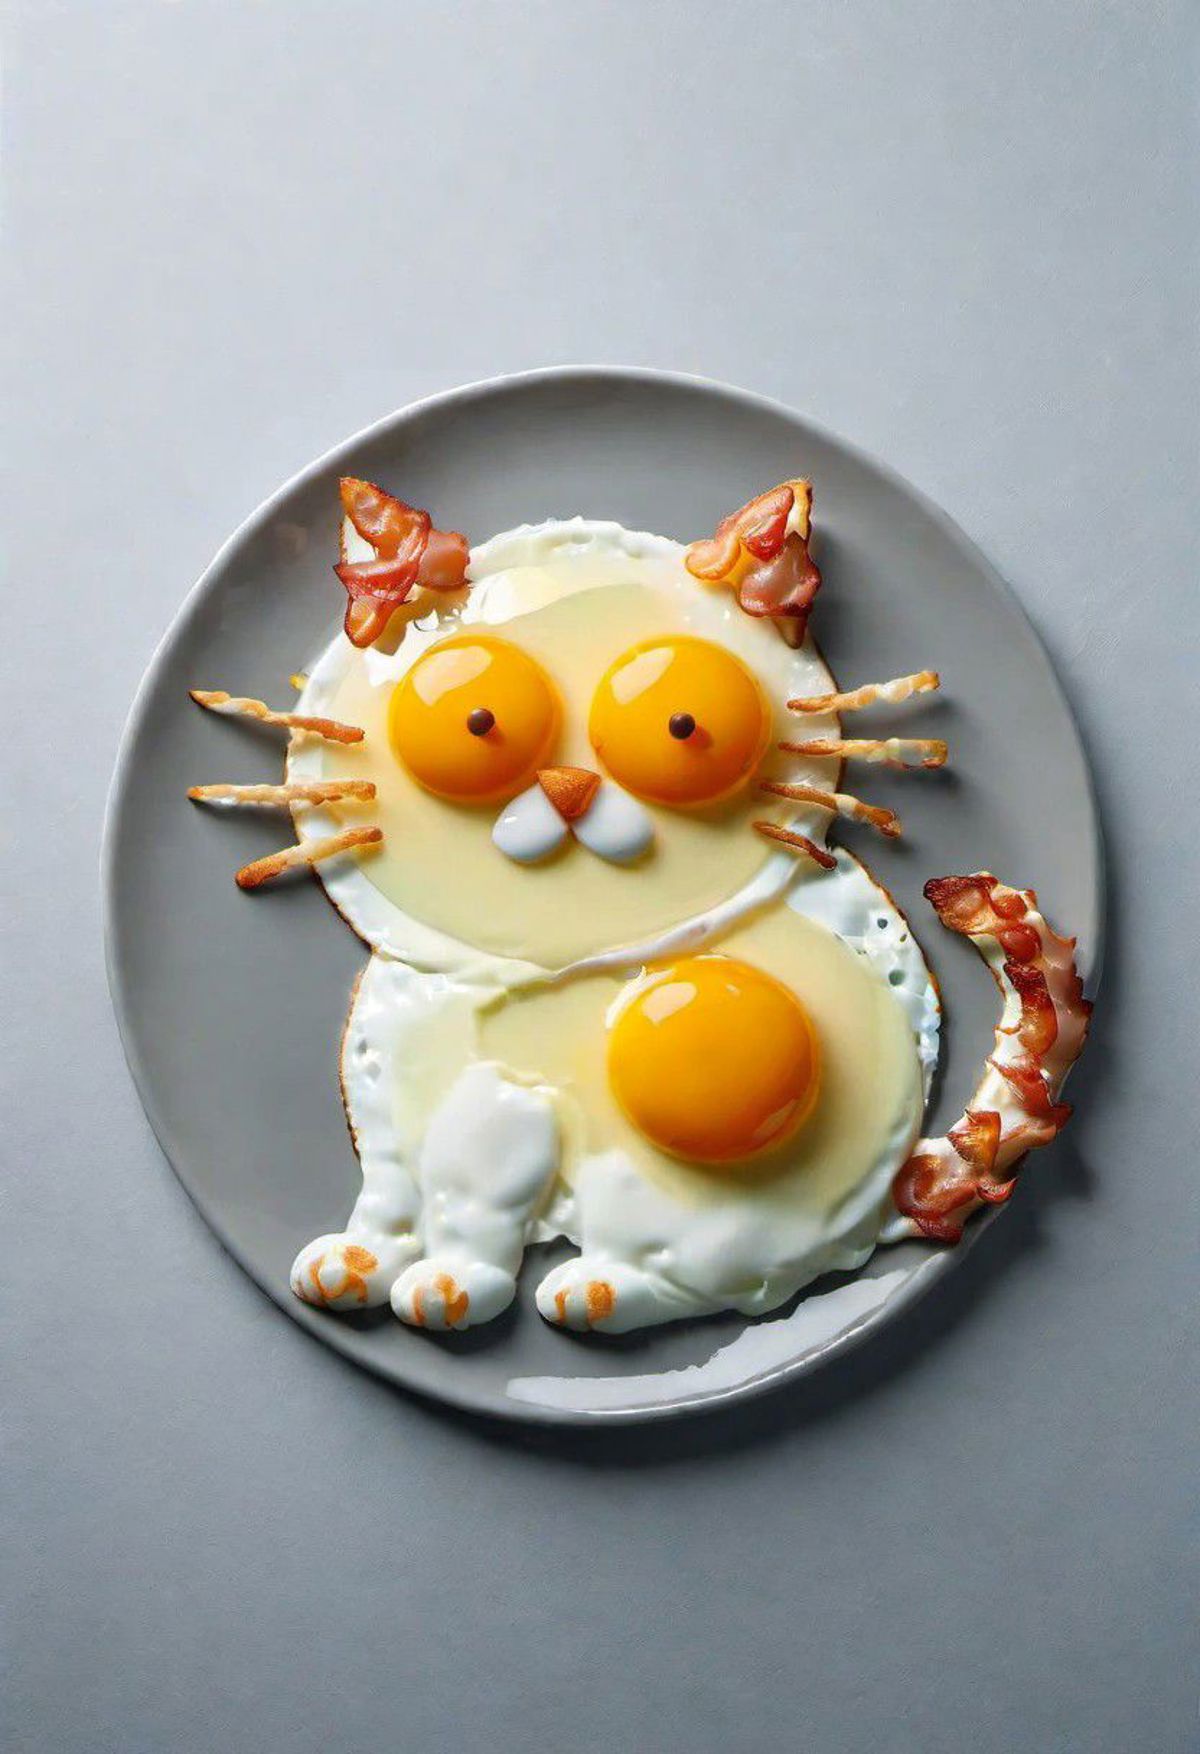 A creative breakfast dish with eggs, bacon, and a cat-shaped design.